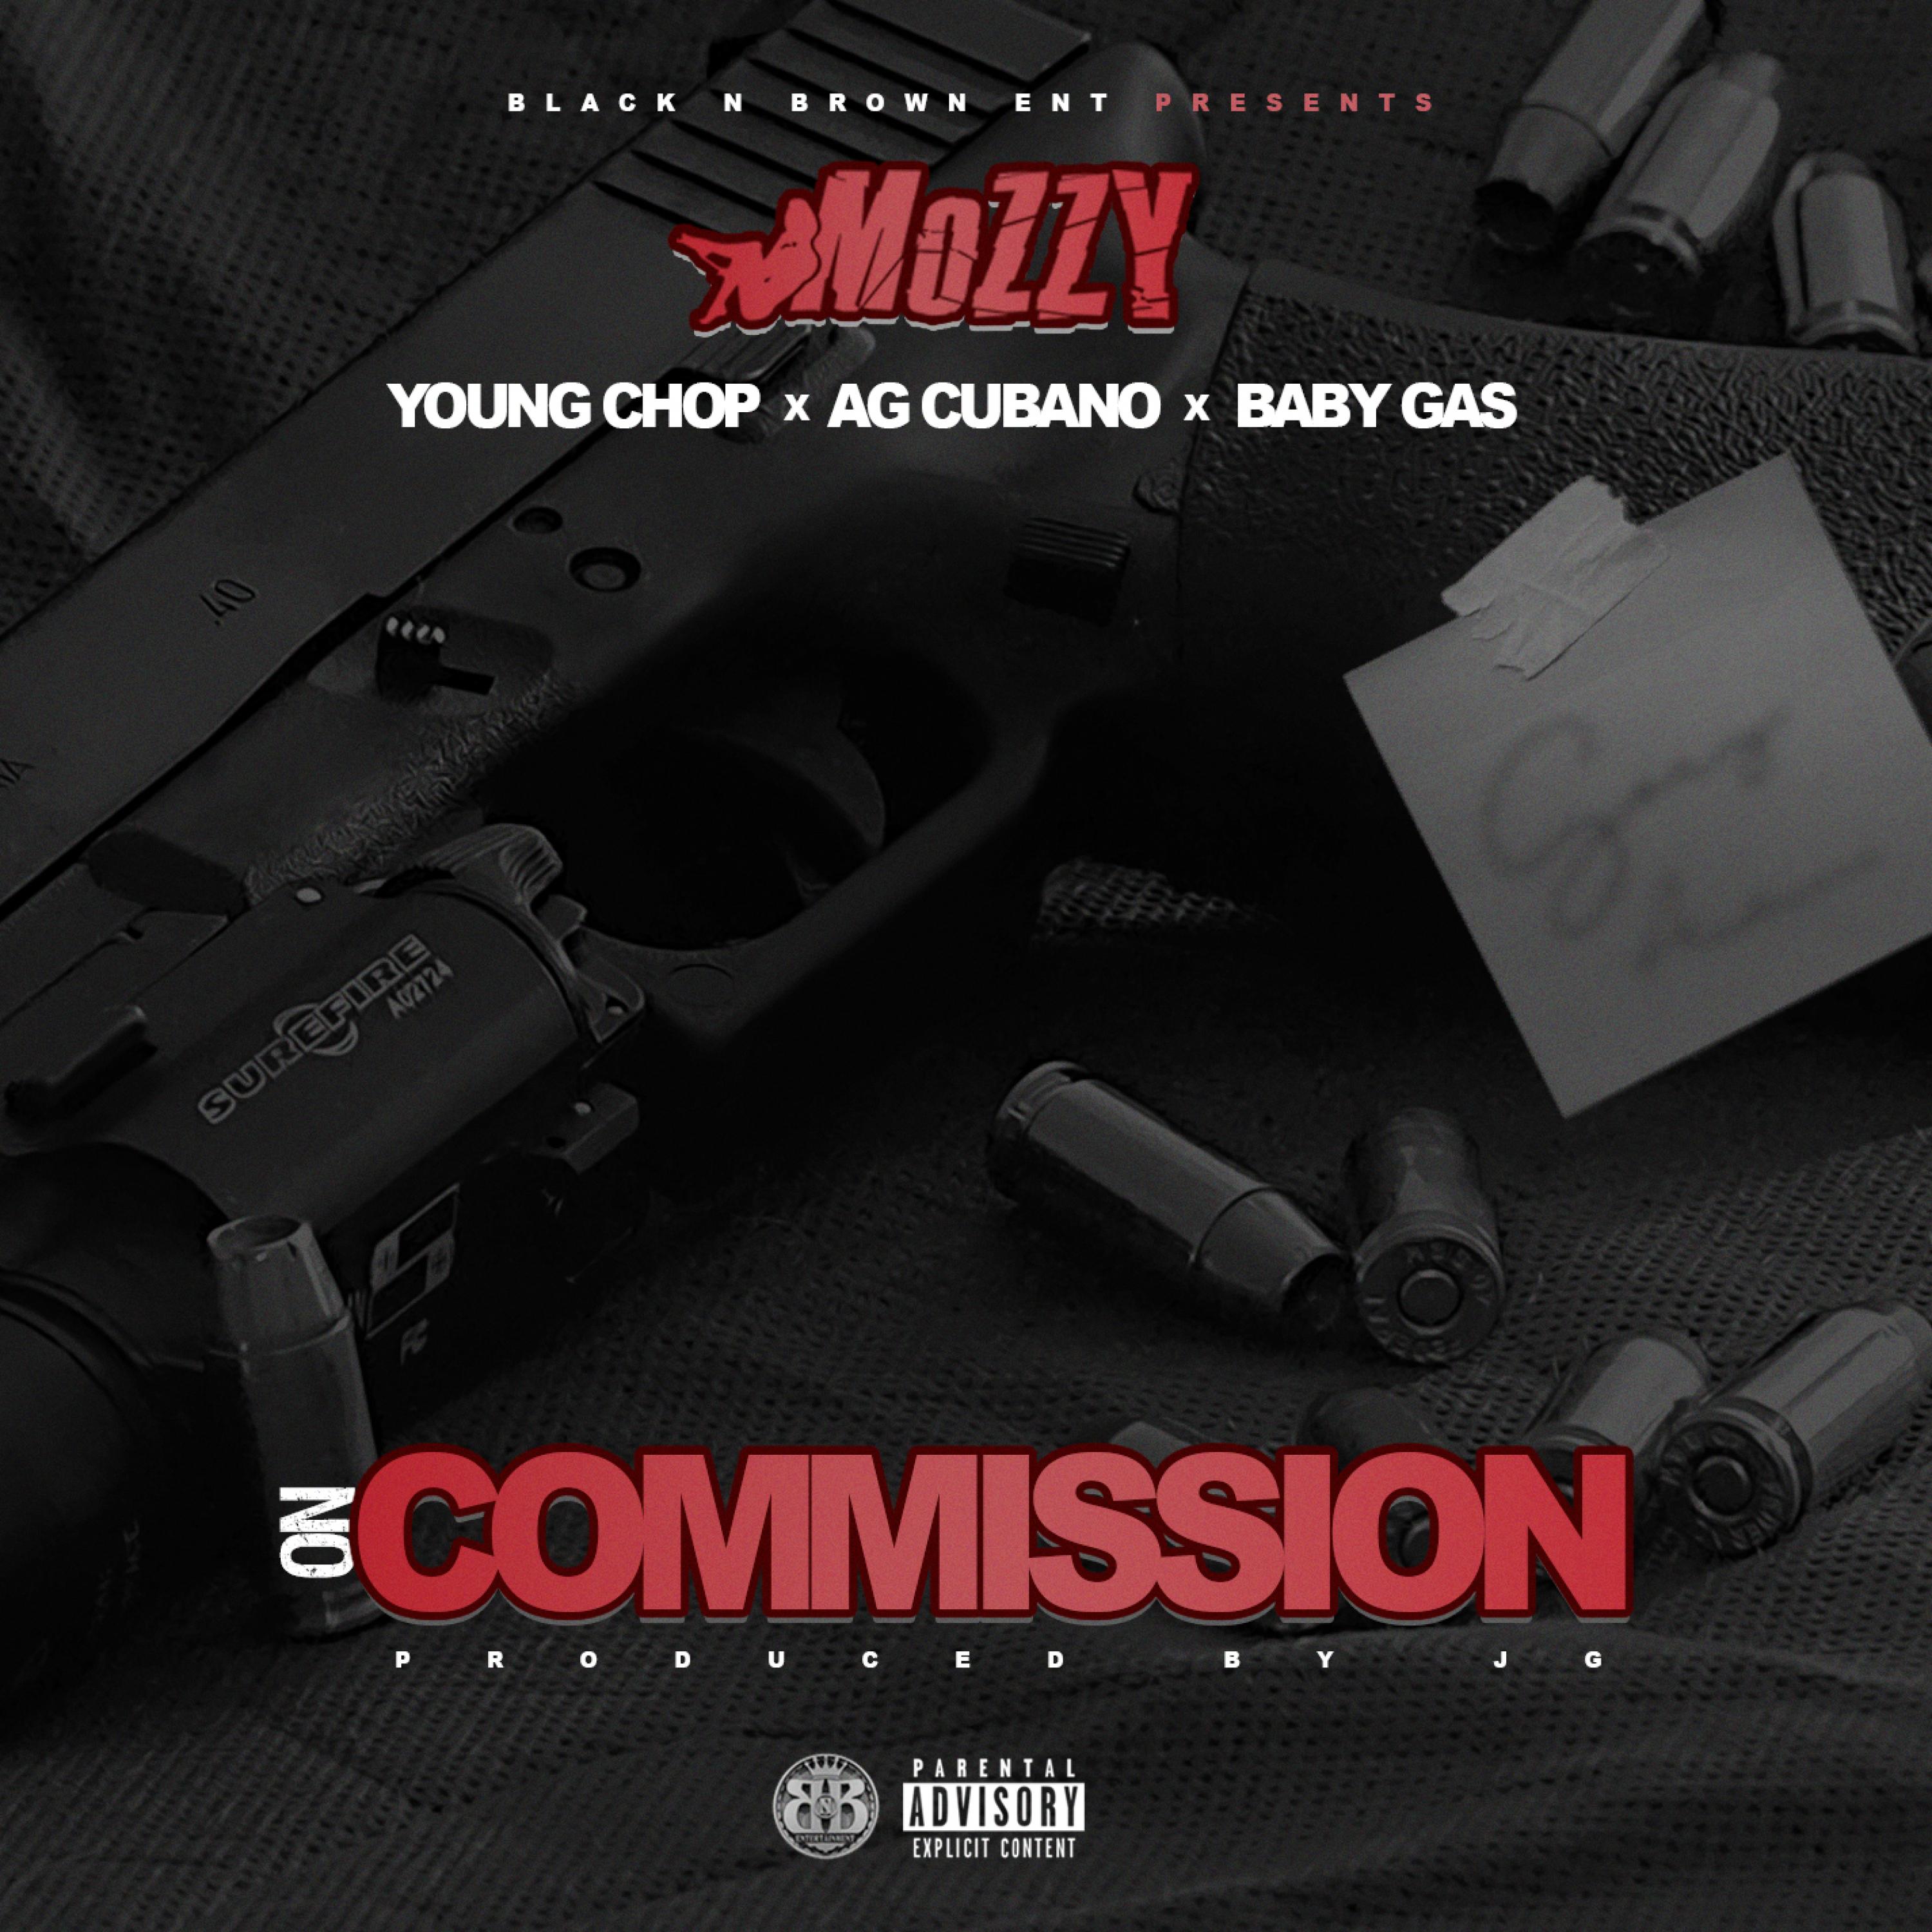 On Commission (feat. Young Chop, AG Cubano & Baby Gas)